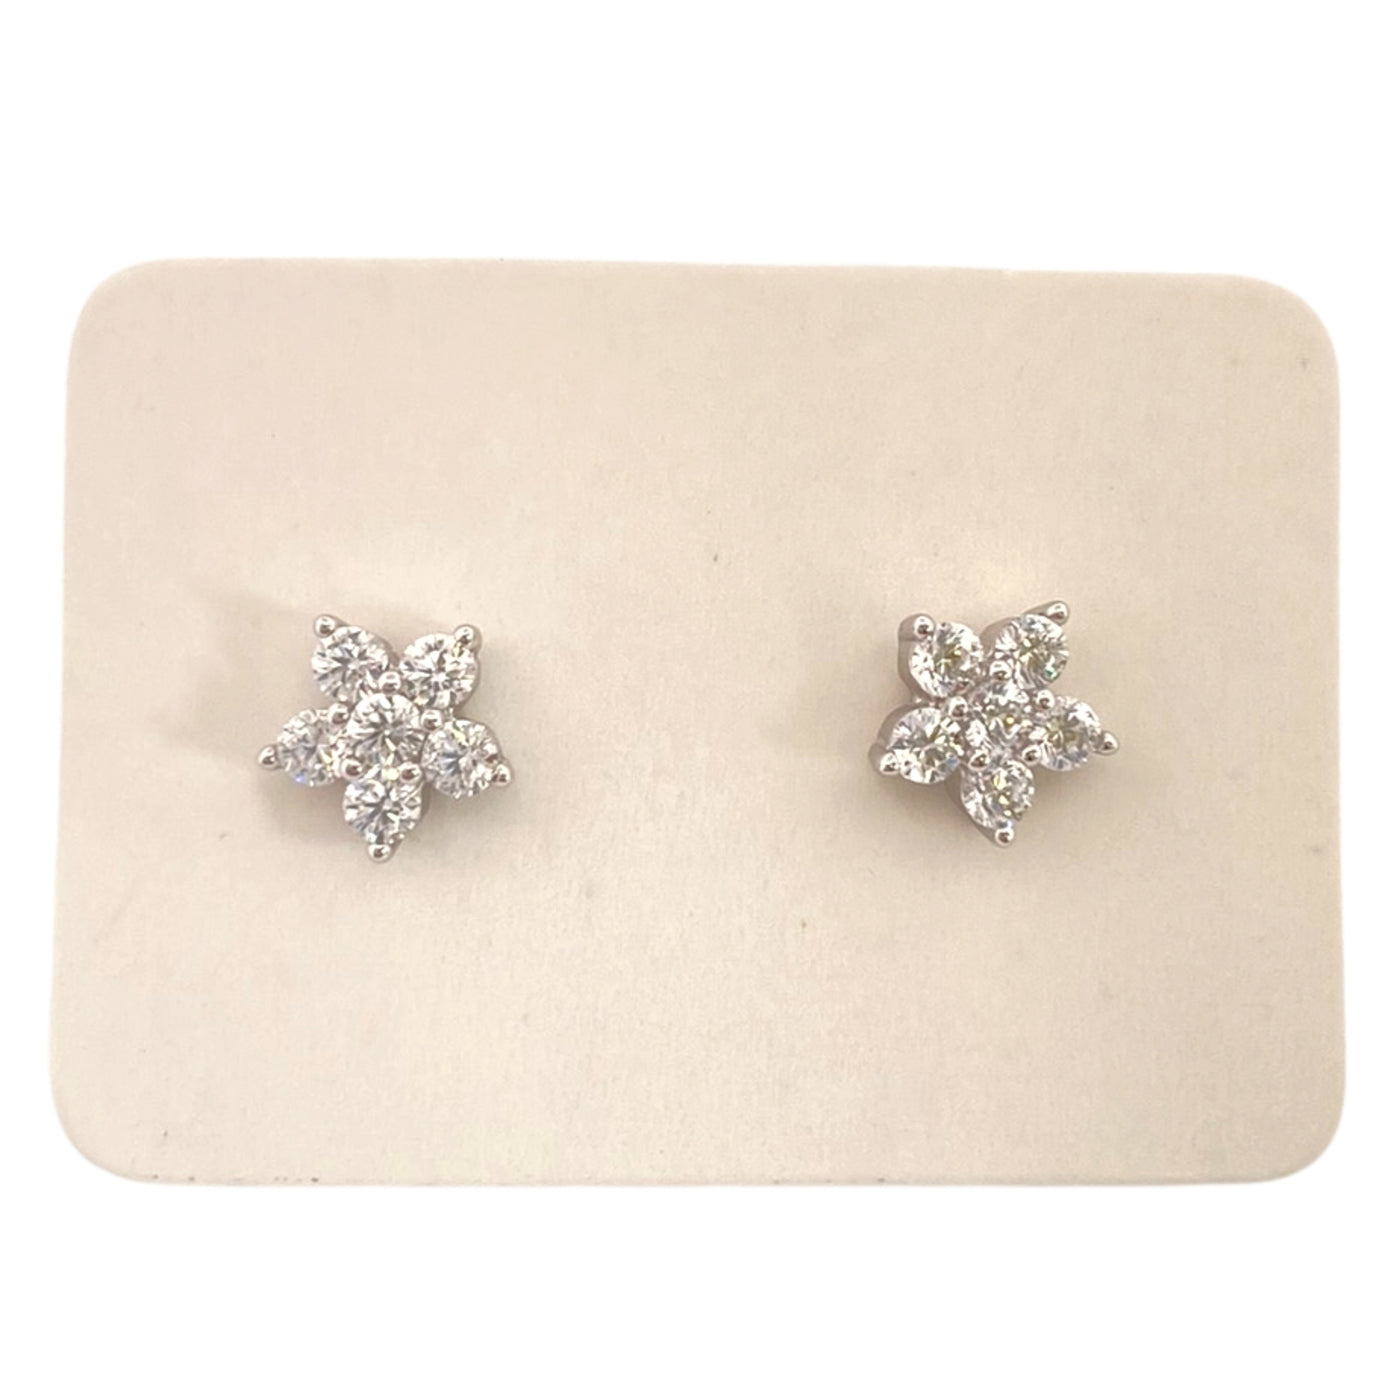 Pack of 5 silver flower stud earrings with cubic zirconia - 6.4 mm